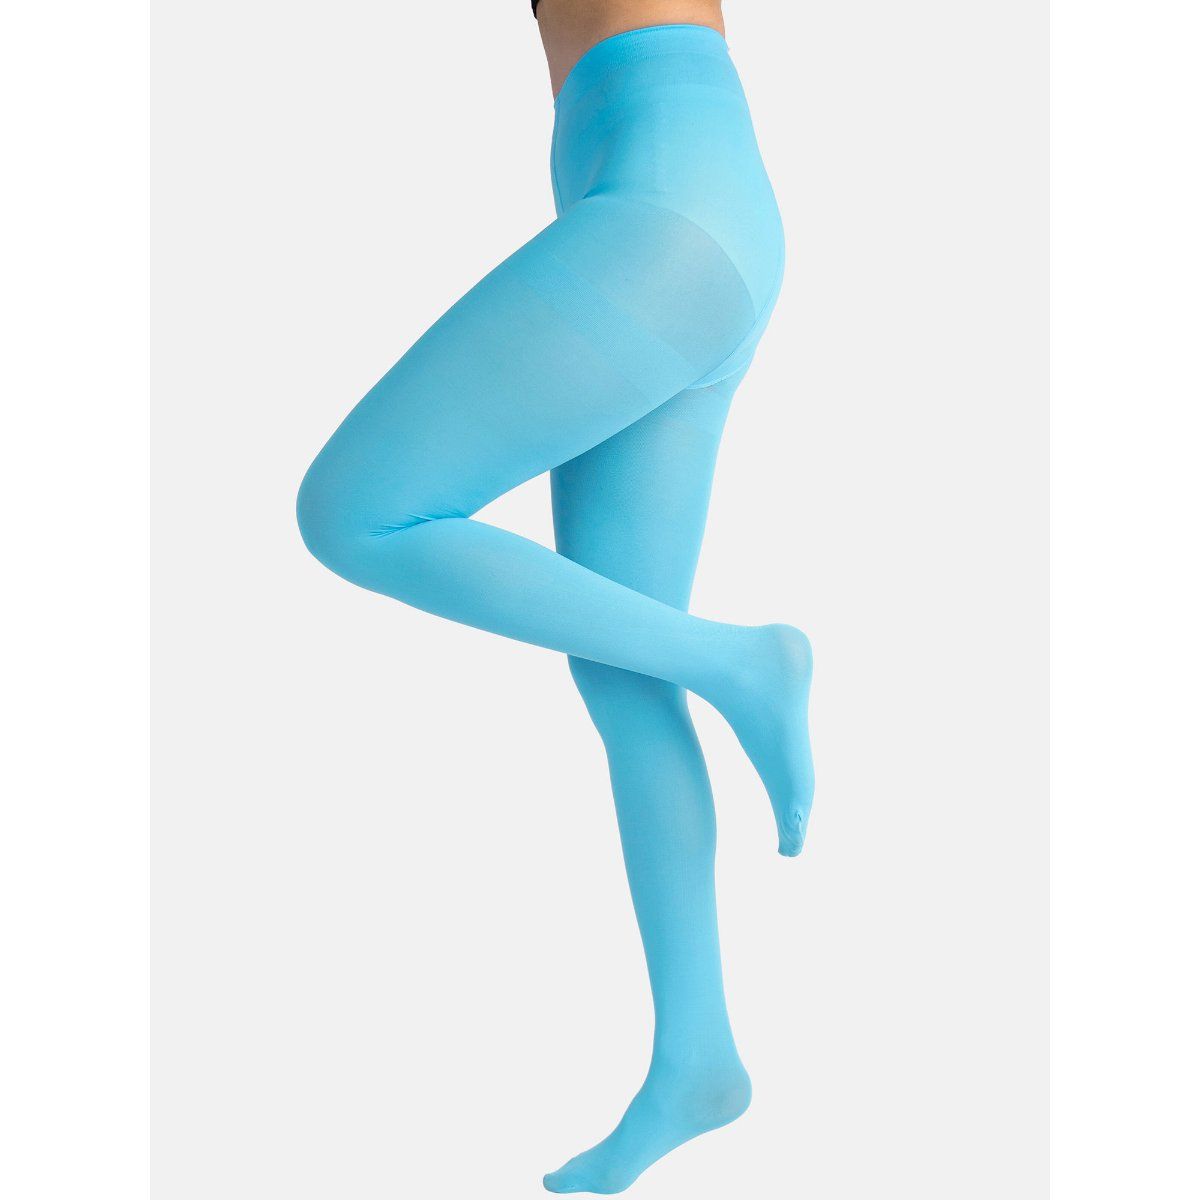 Theater Riviera Stockings Blue Buy Theater Riviera Stockings Blue Online At Best Price In